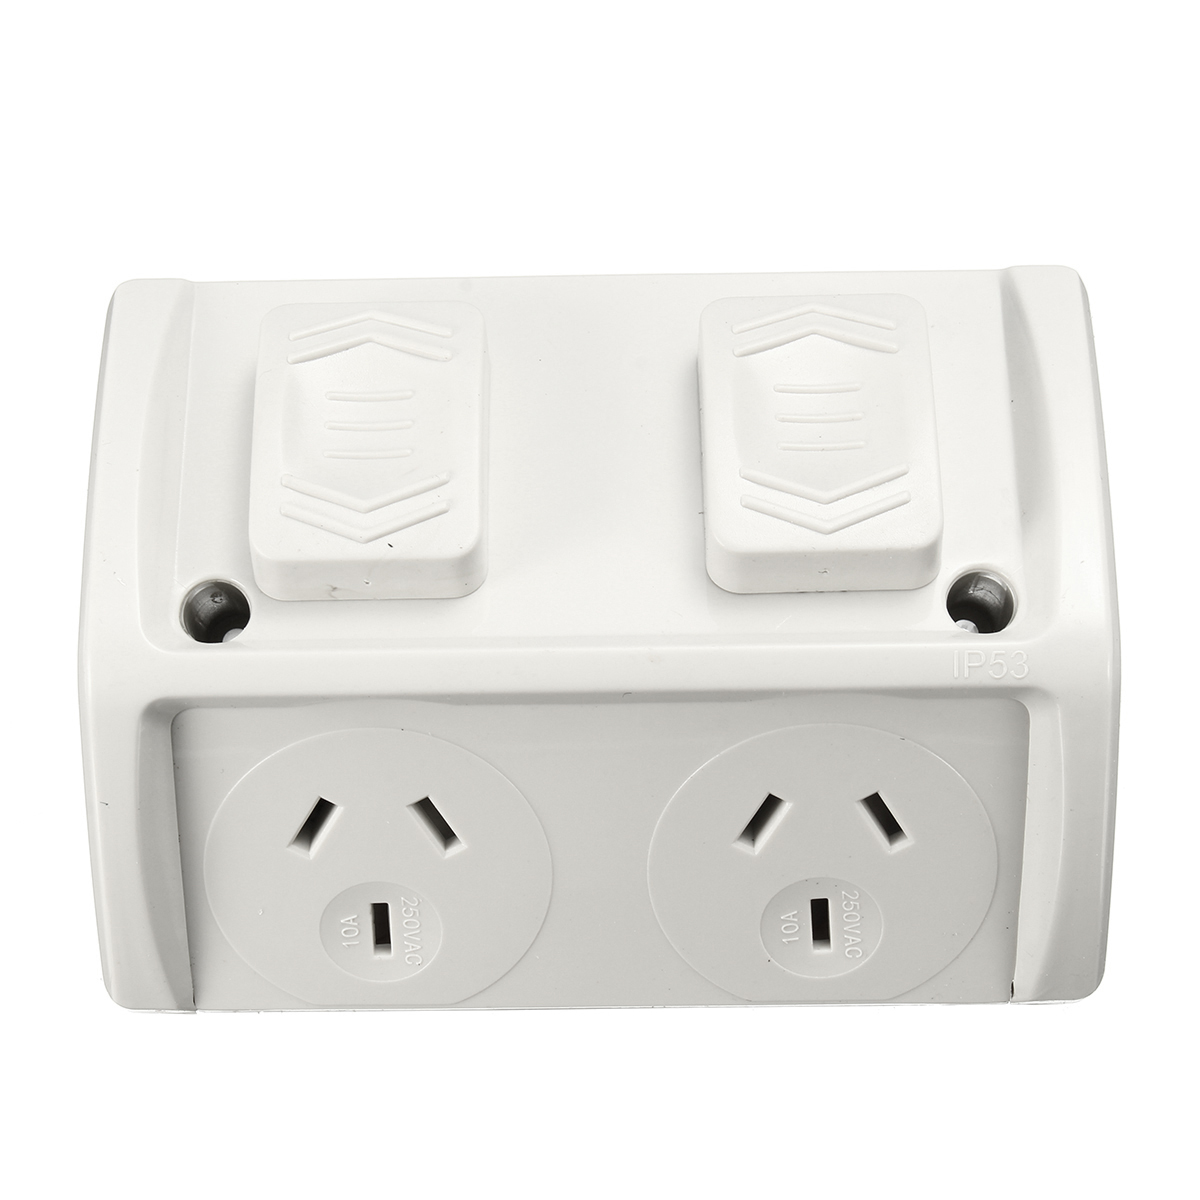 10A-Weatherproof-Double-Powerpoint-Outdoor-Power-Outlet-Switch-Socket-AU-1310264-6